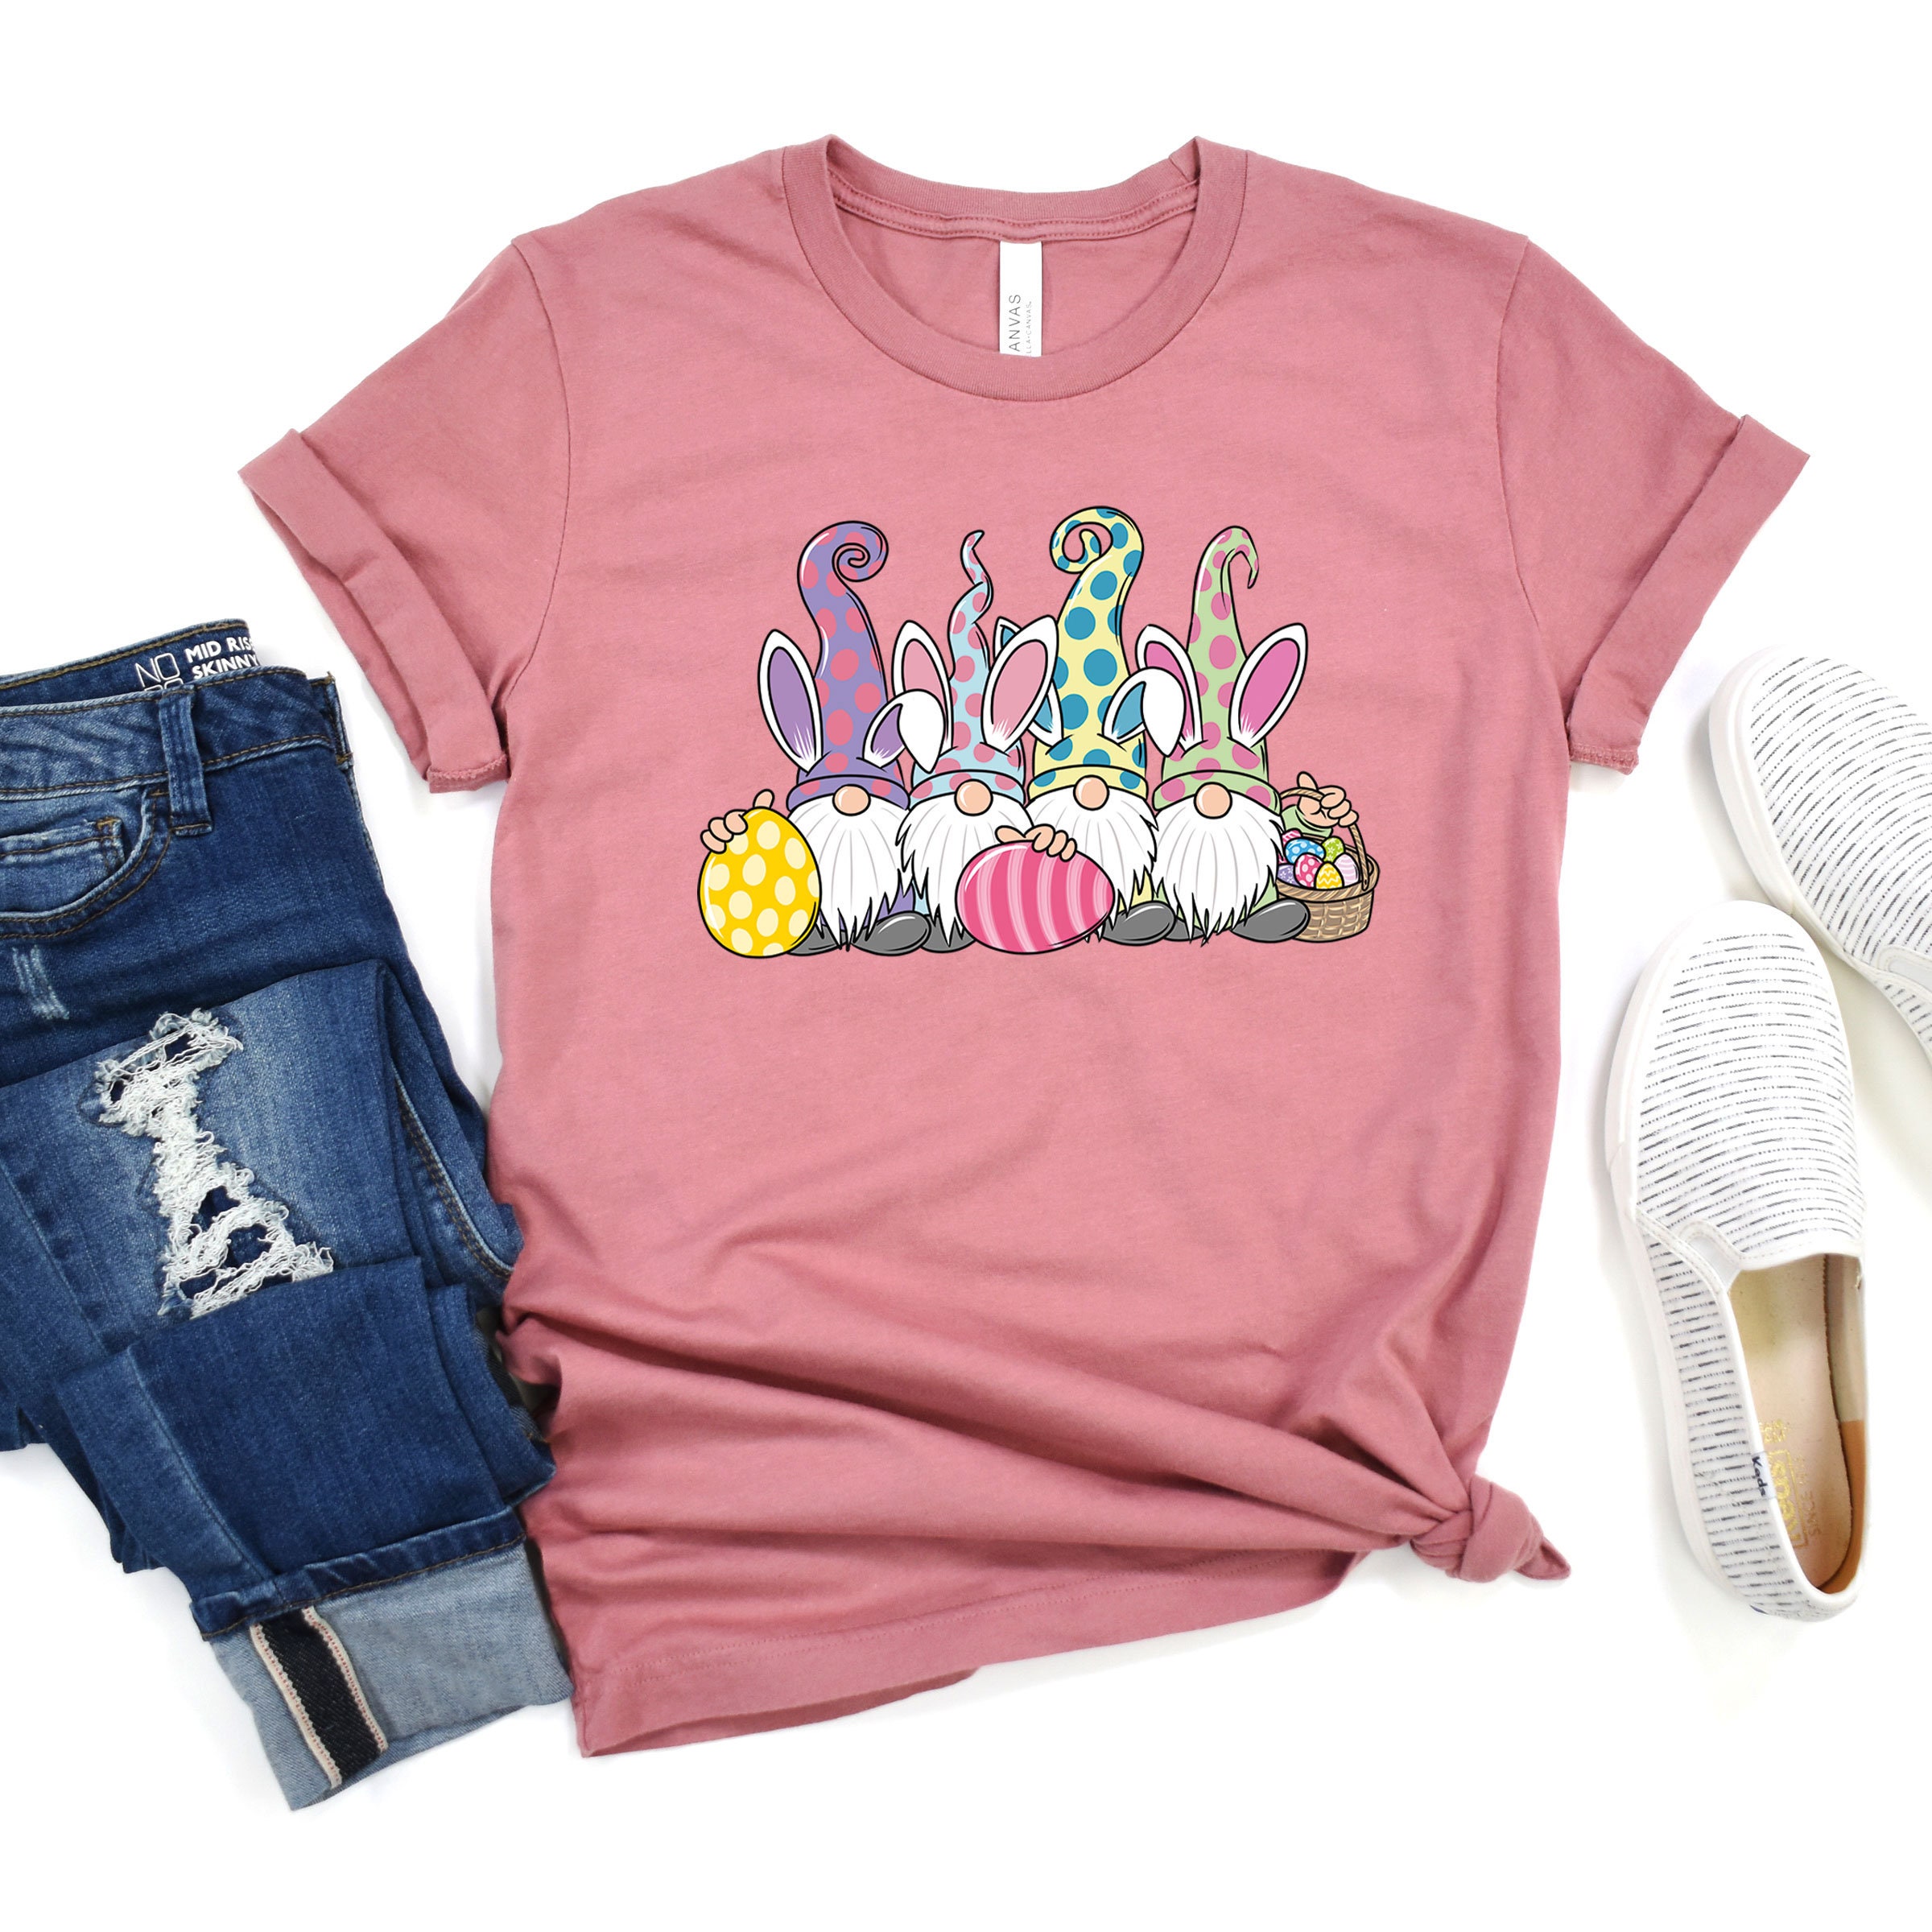 Discover Pink Easter Gnome Tshirt - Easter Gnome Party Shirt - Easter Basket T-Shirt